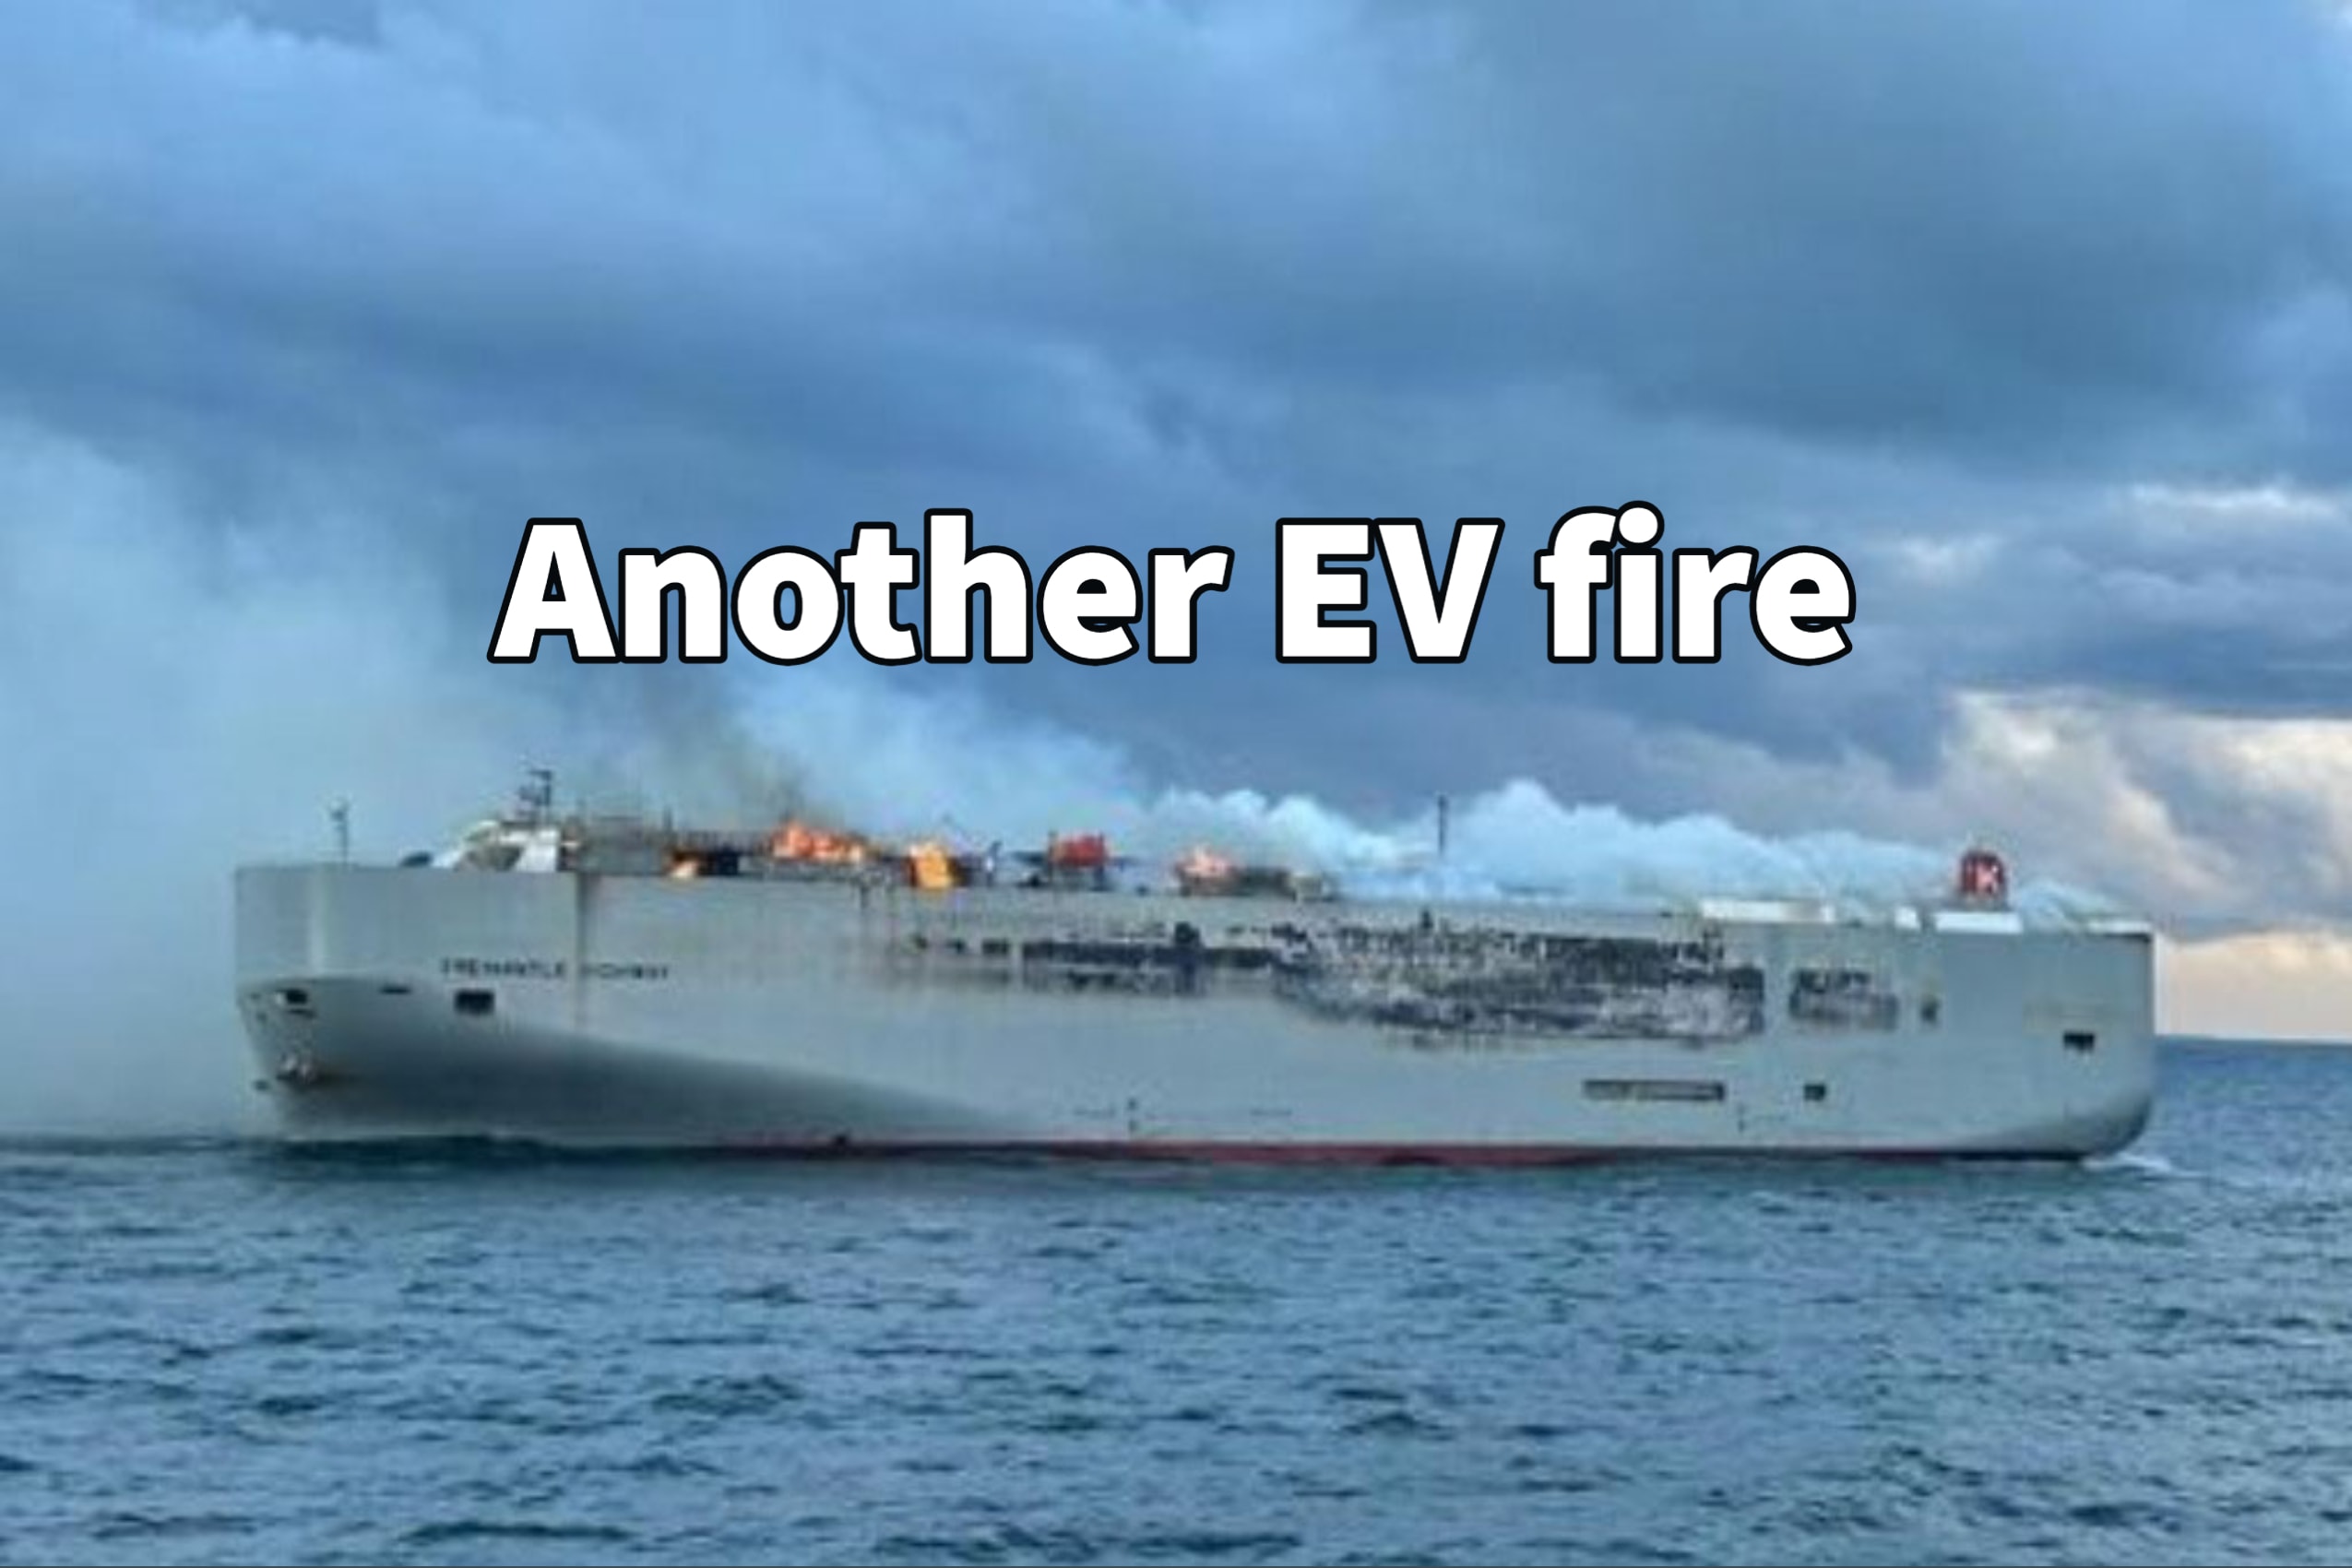 Breaking Cargo Ship Carrying Electric Vehicles Is Burning Near Ameland